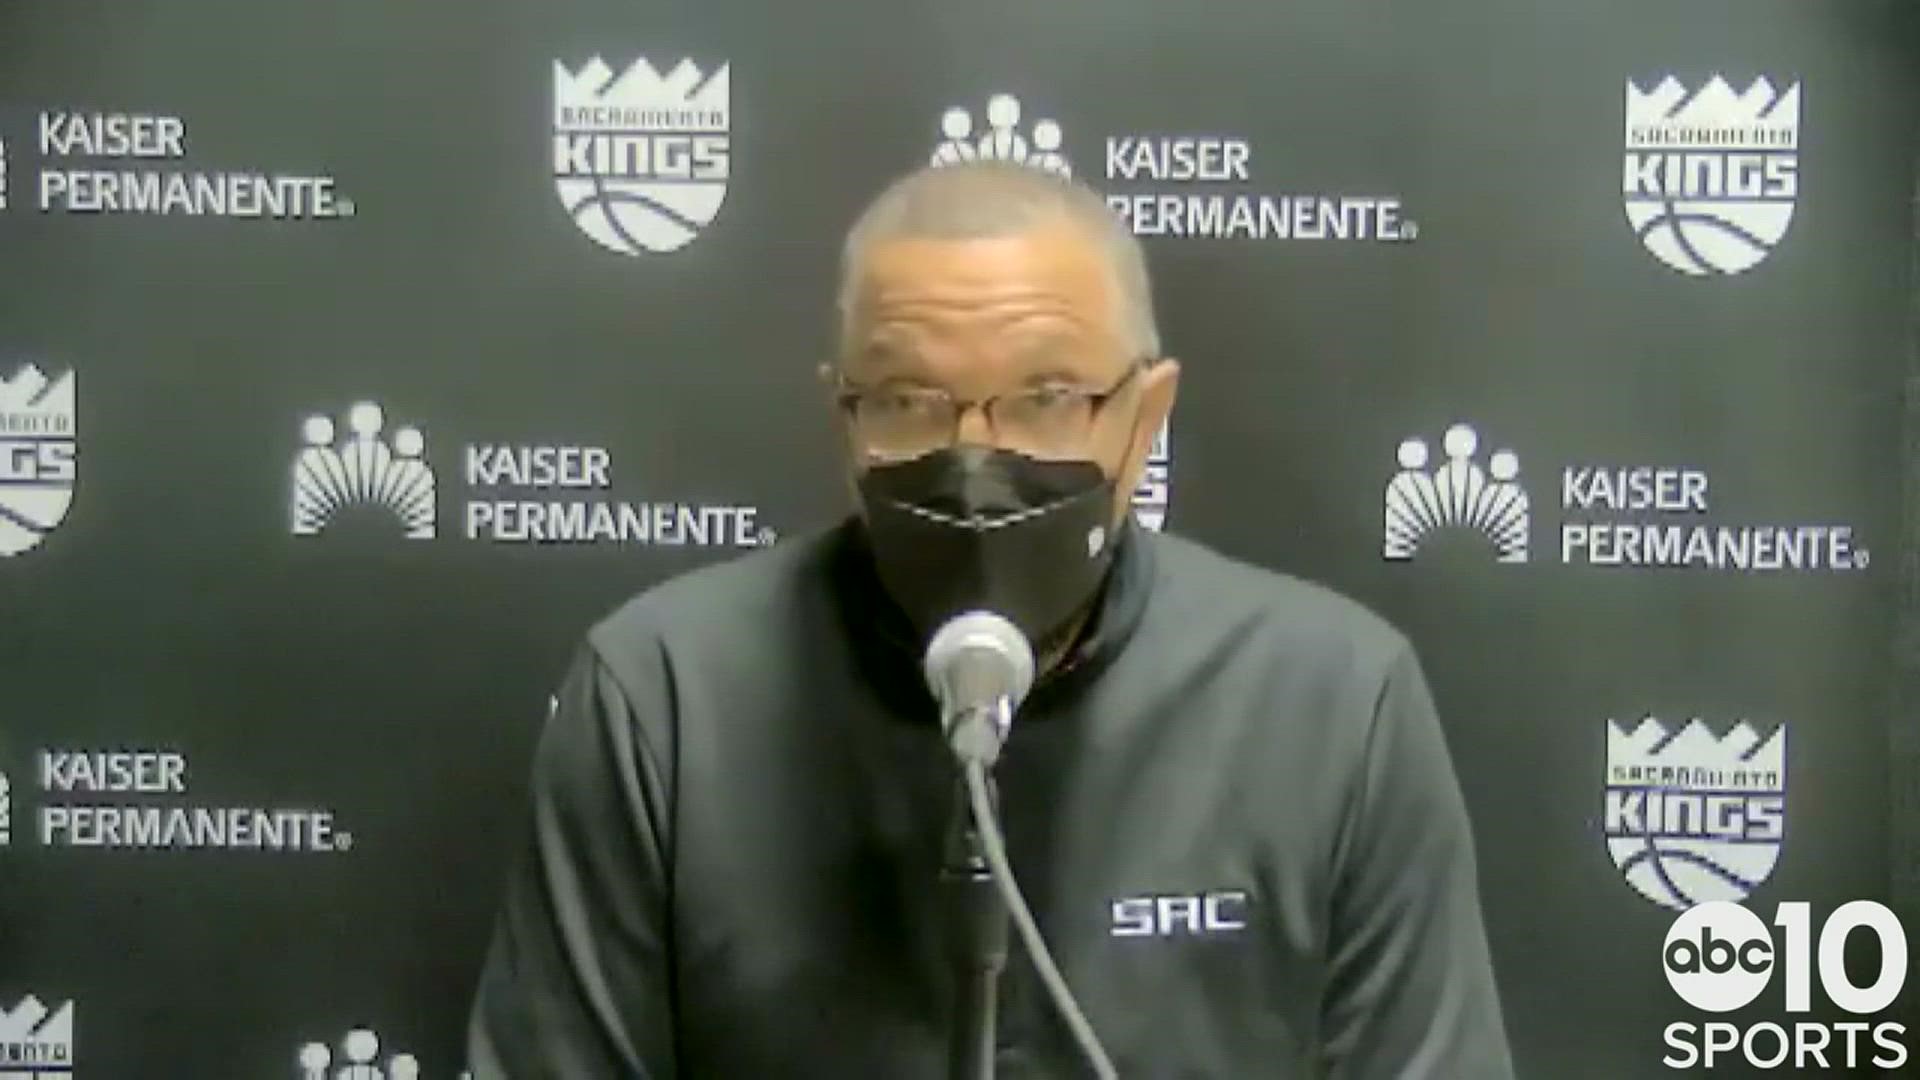 Sacramento Kings interim head coach Alvin Gentry talks about Friday's 121-111 loss in Denver to the Nuggets and dropping a third consecutive game.